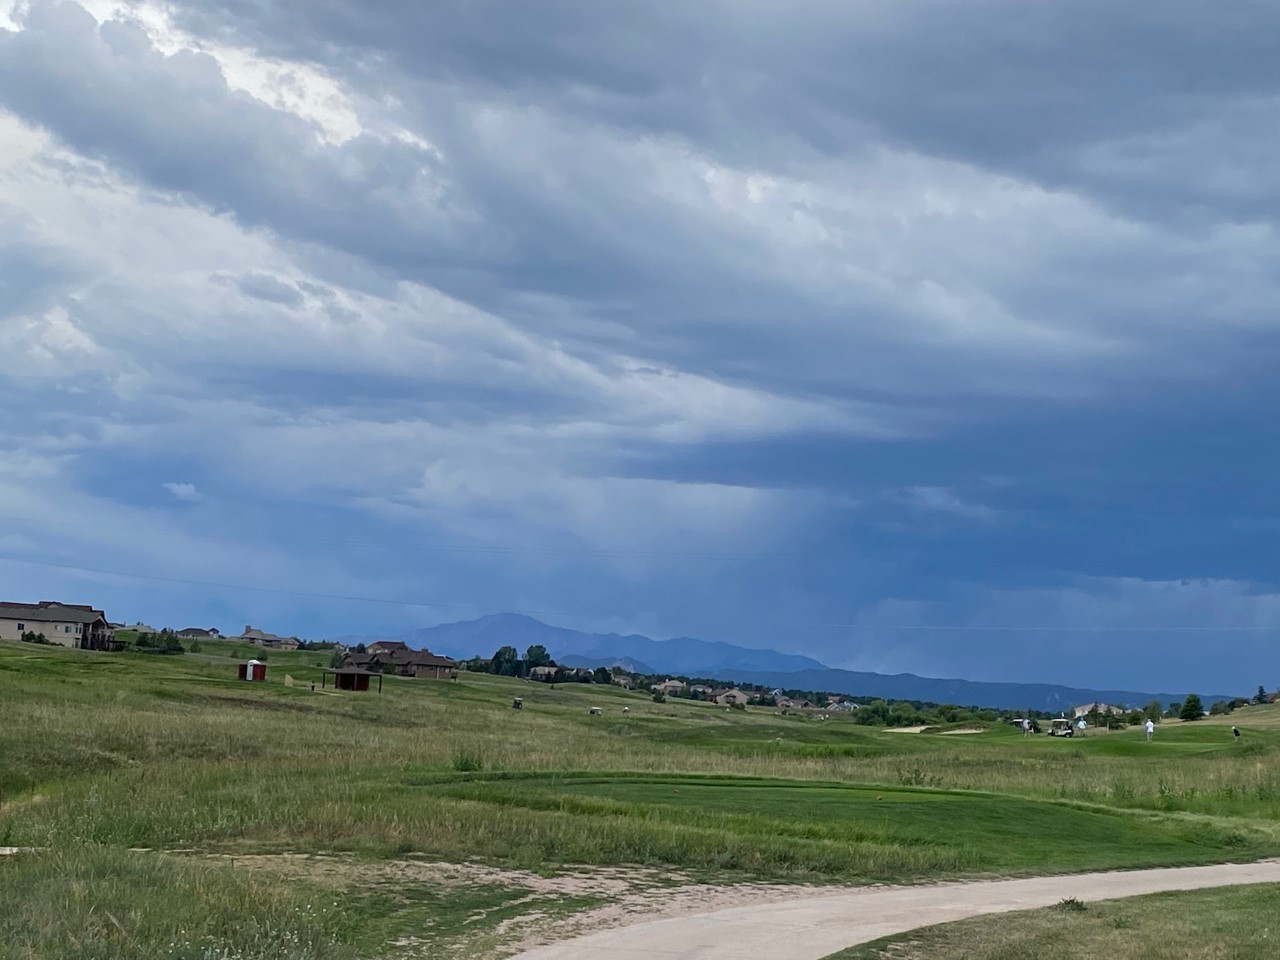 King’s Deer Golf Club as a storm arrives with views of Pike’s Peak and Front Range.